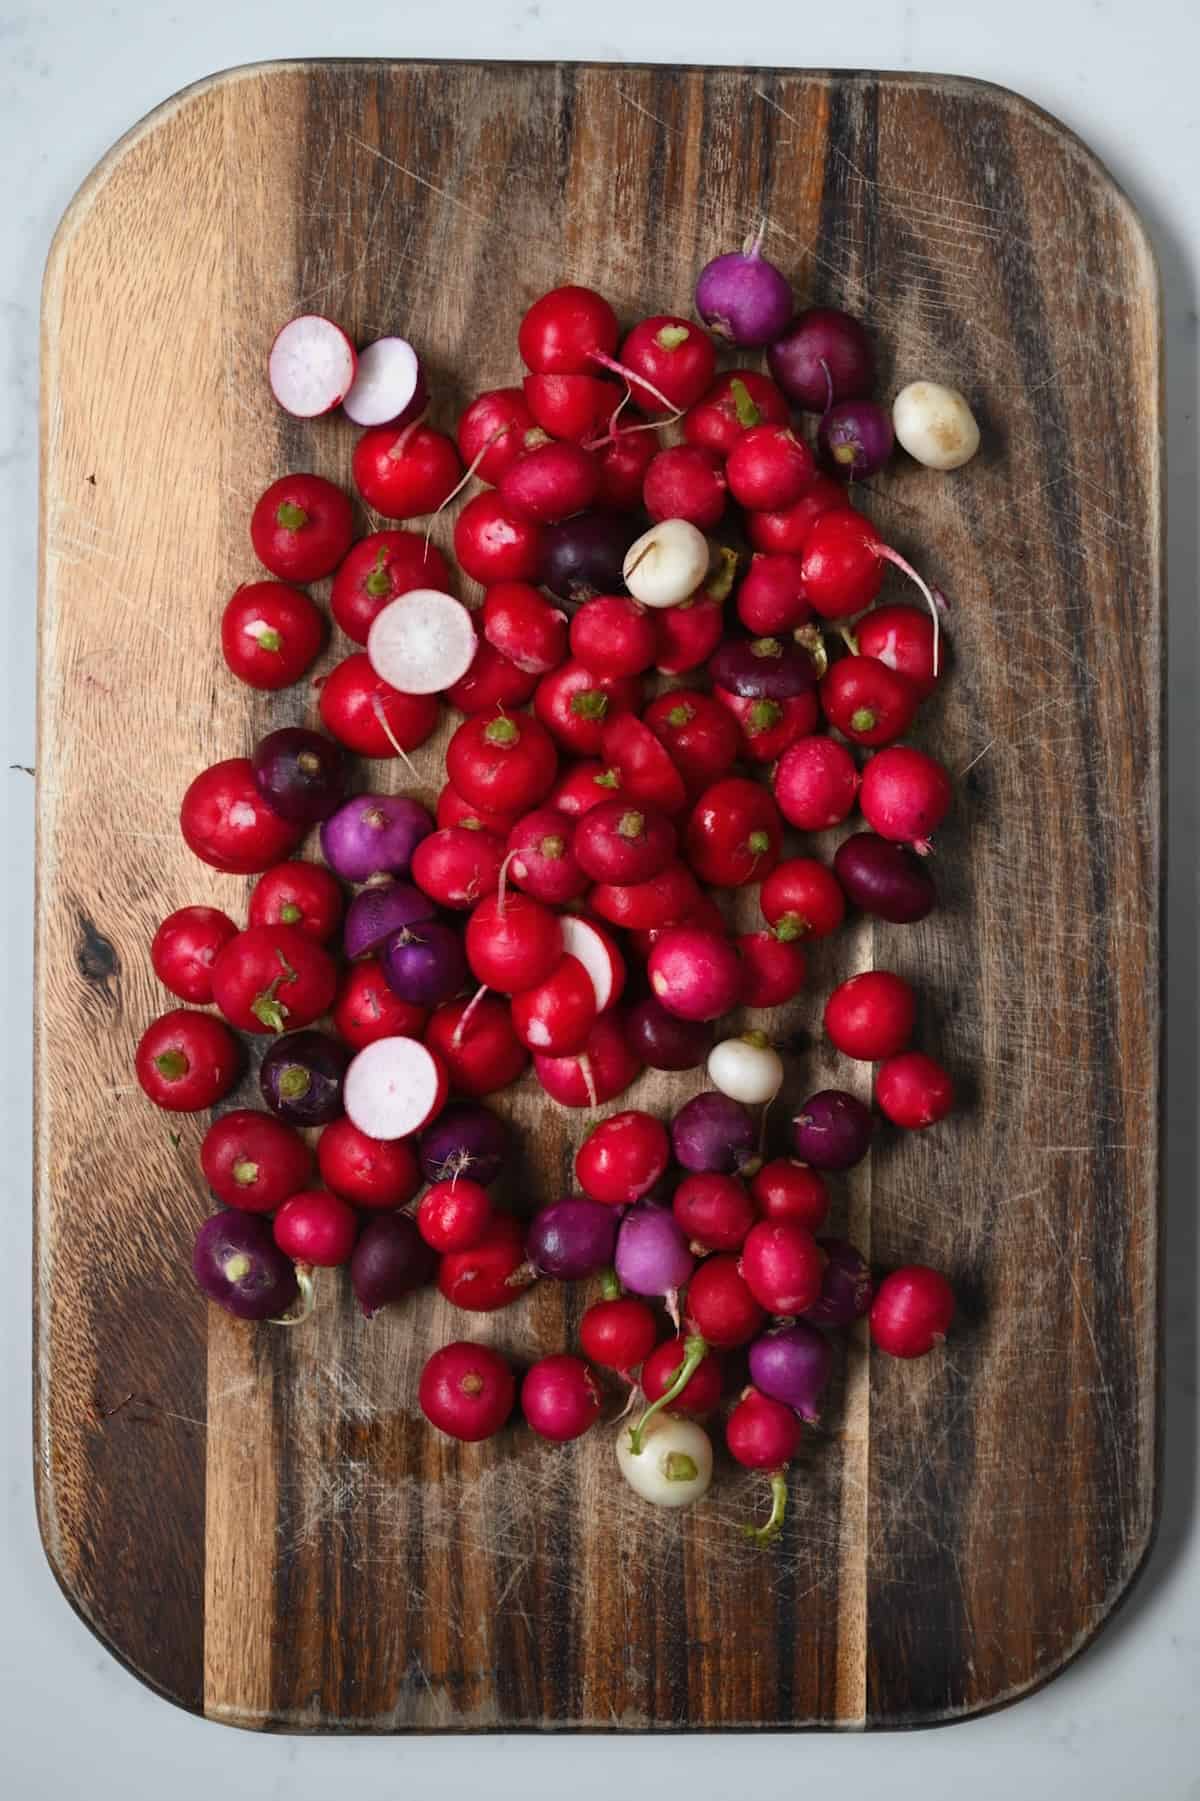 Washed and trimmed radish on a board